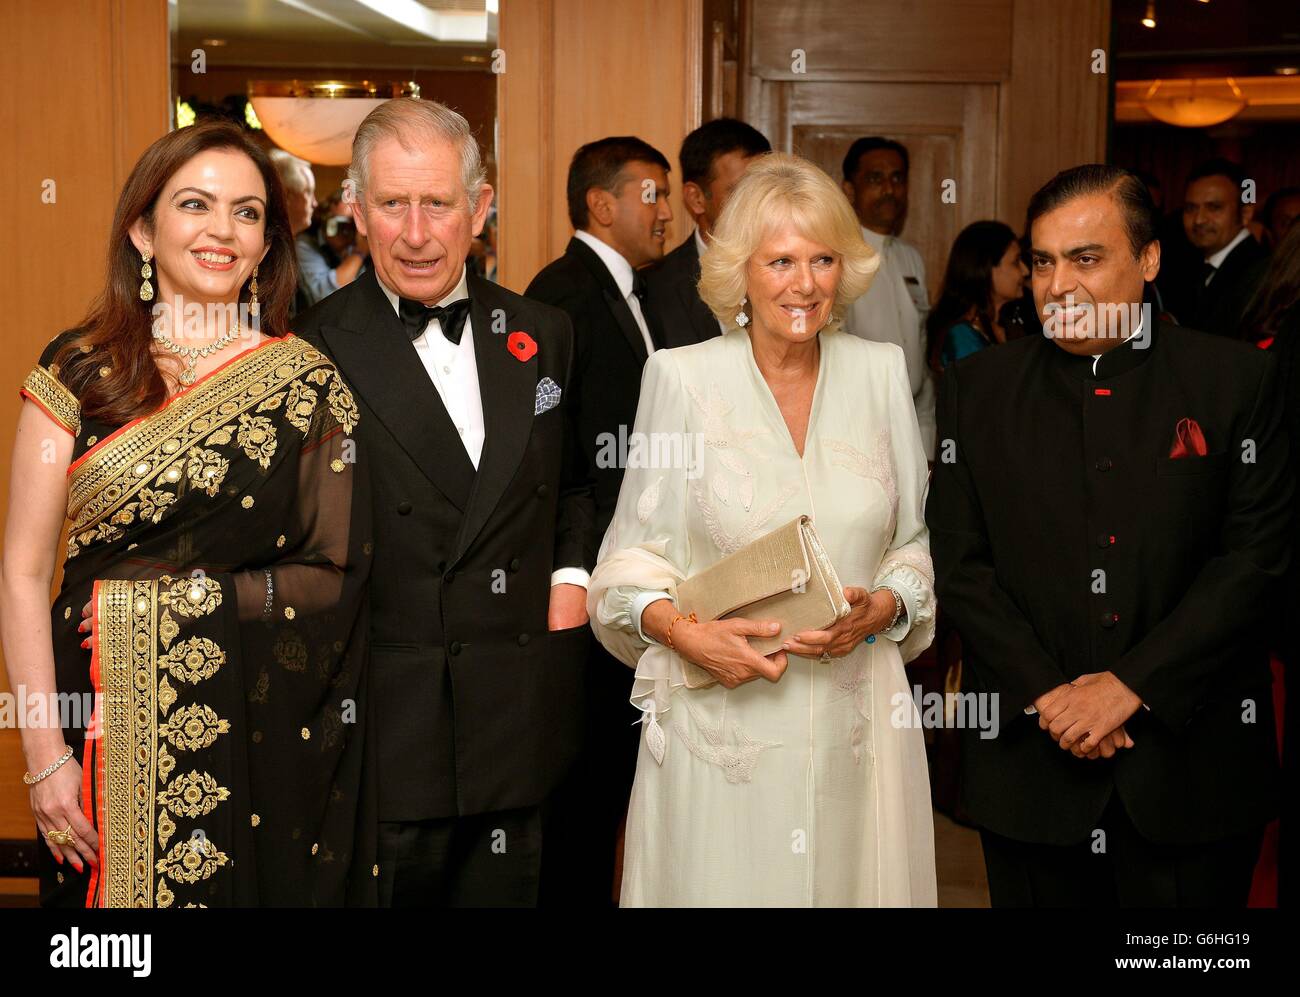 The Prince of Wales and the Duchess of Cornwall with Indian Billionaire Mukesh Ambani and his wife Nita, after arriving to attend a charity fund raising dinner in Mumbai India, on the fourth day of their eleven day tour of India and Sri Lanka. Stock Photo